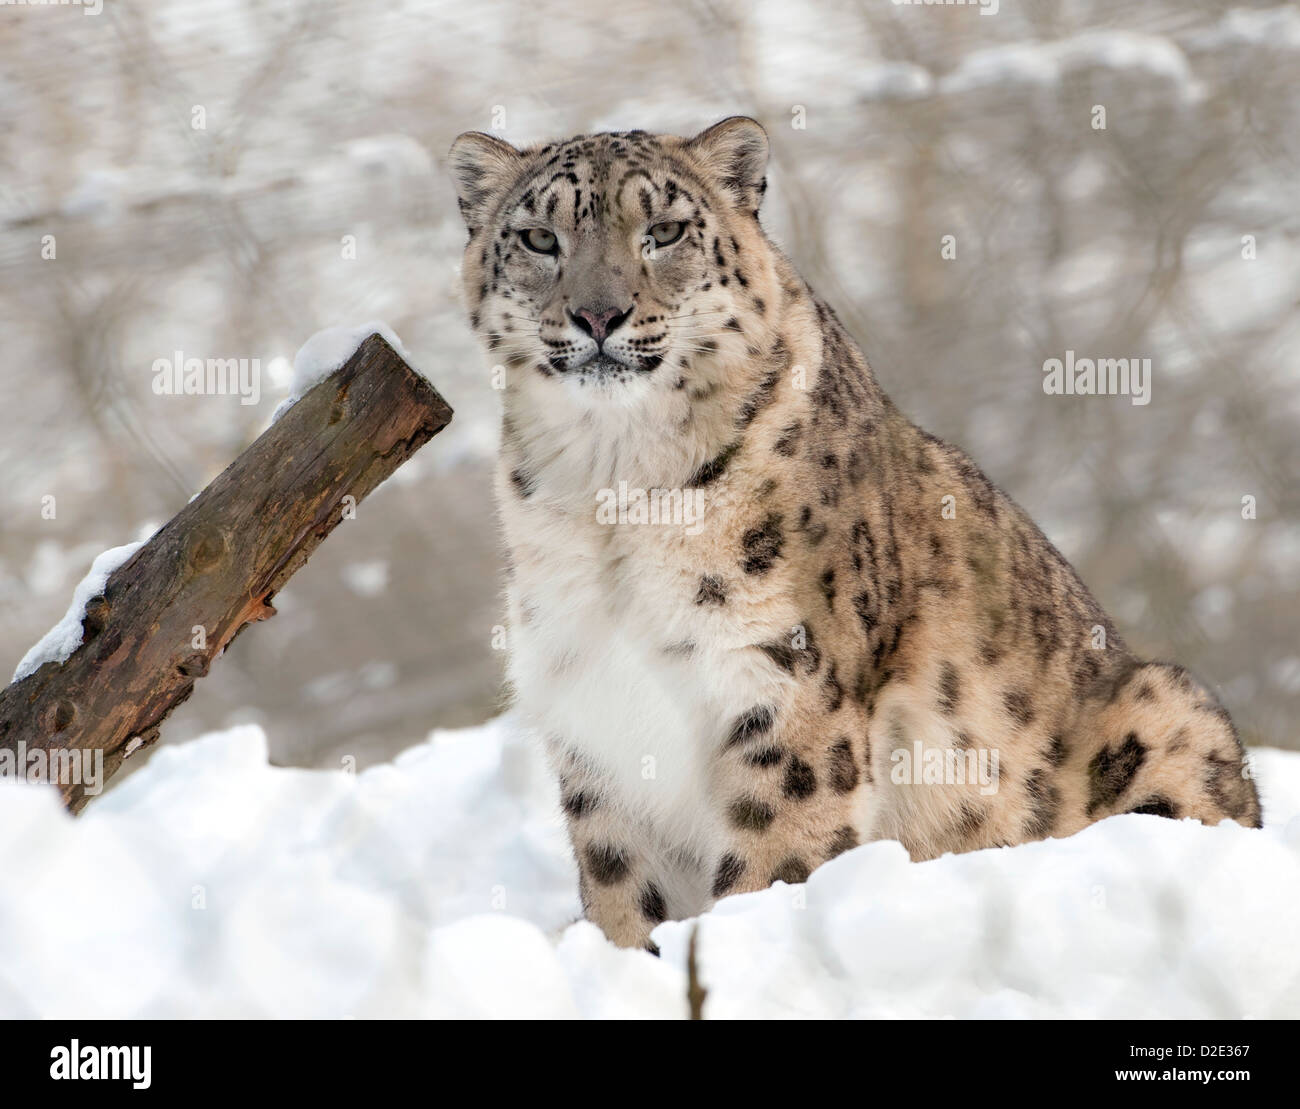 Snow Leopard femelle sitting in snow Banque D'Images